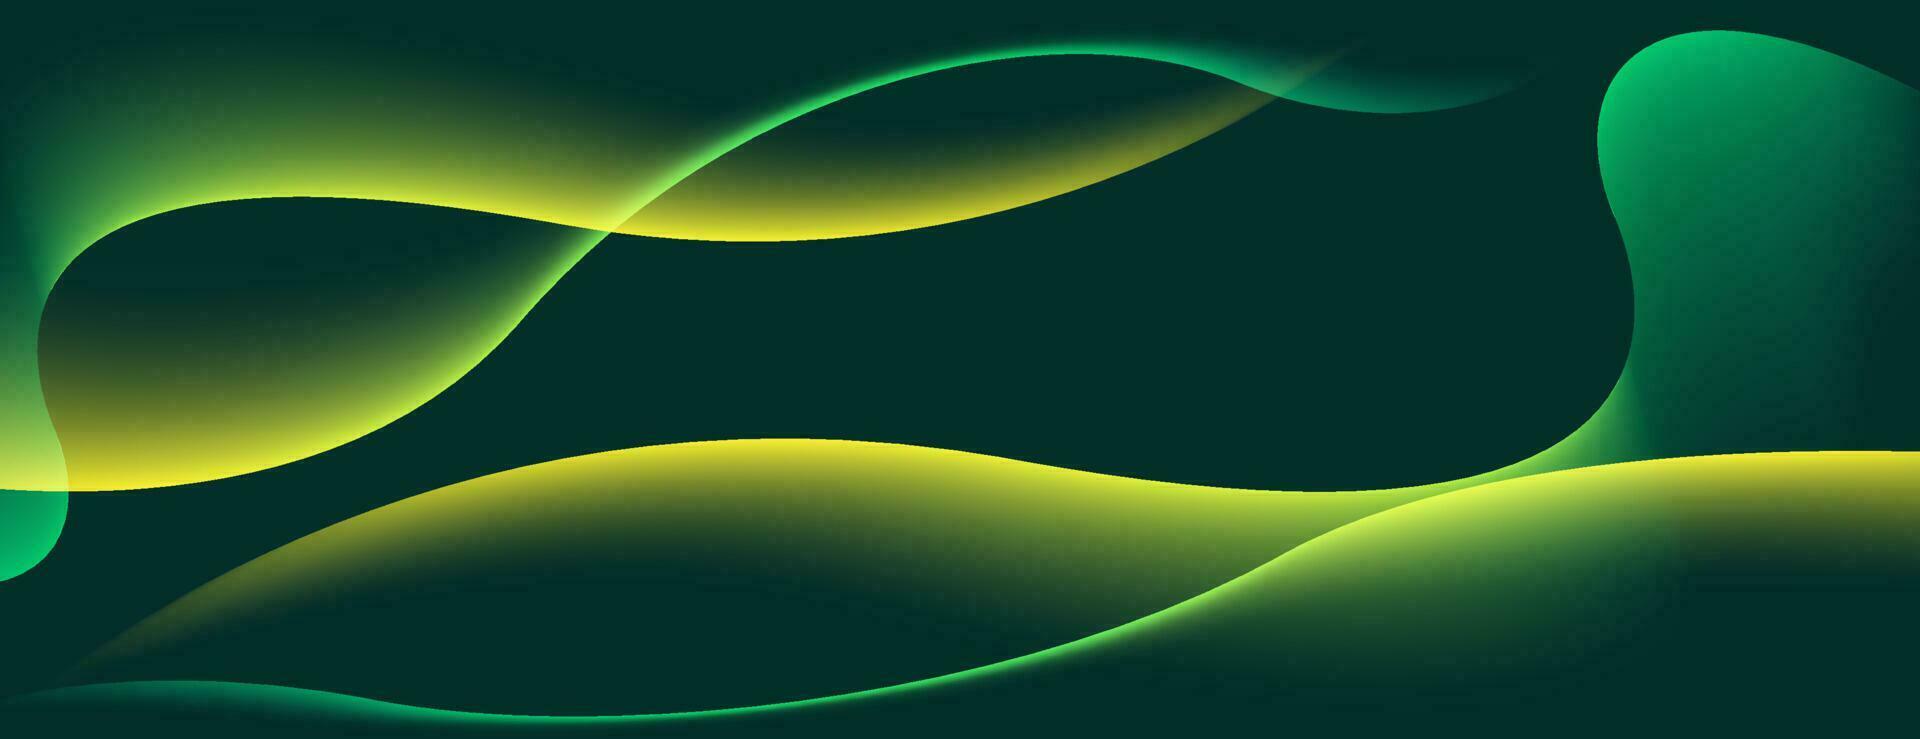 dynamic wave abstract background with yellow light. vector design template